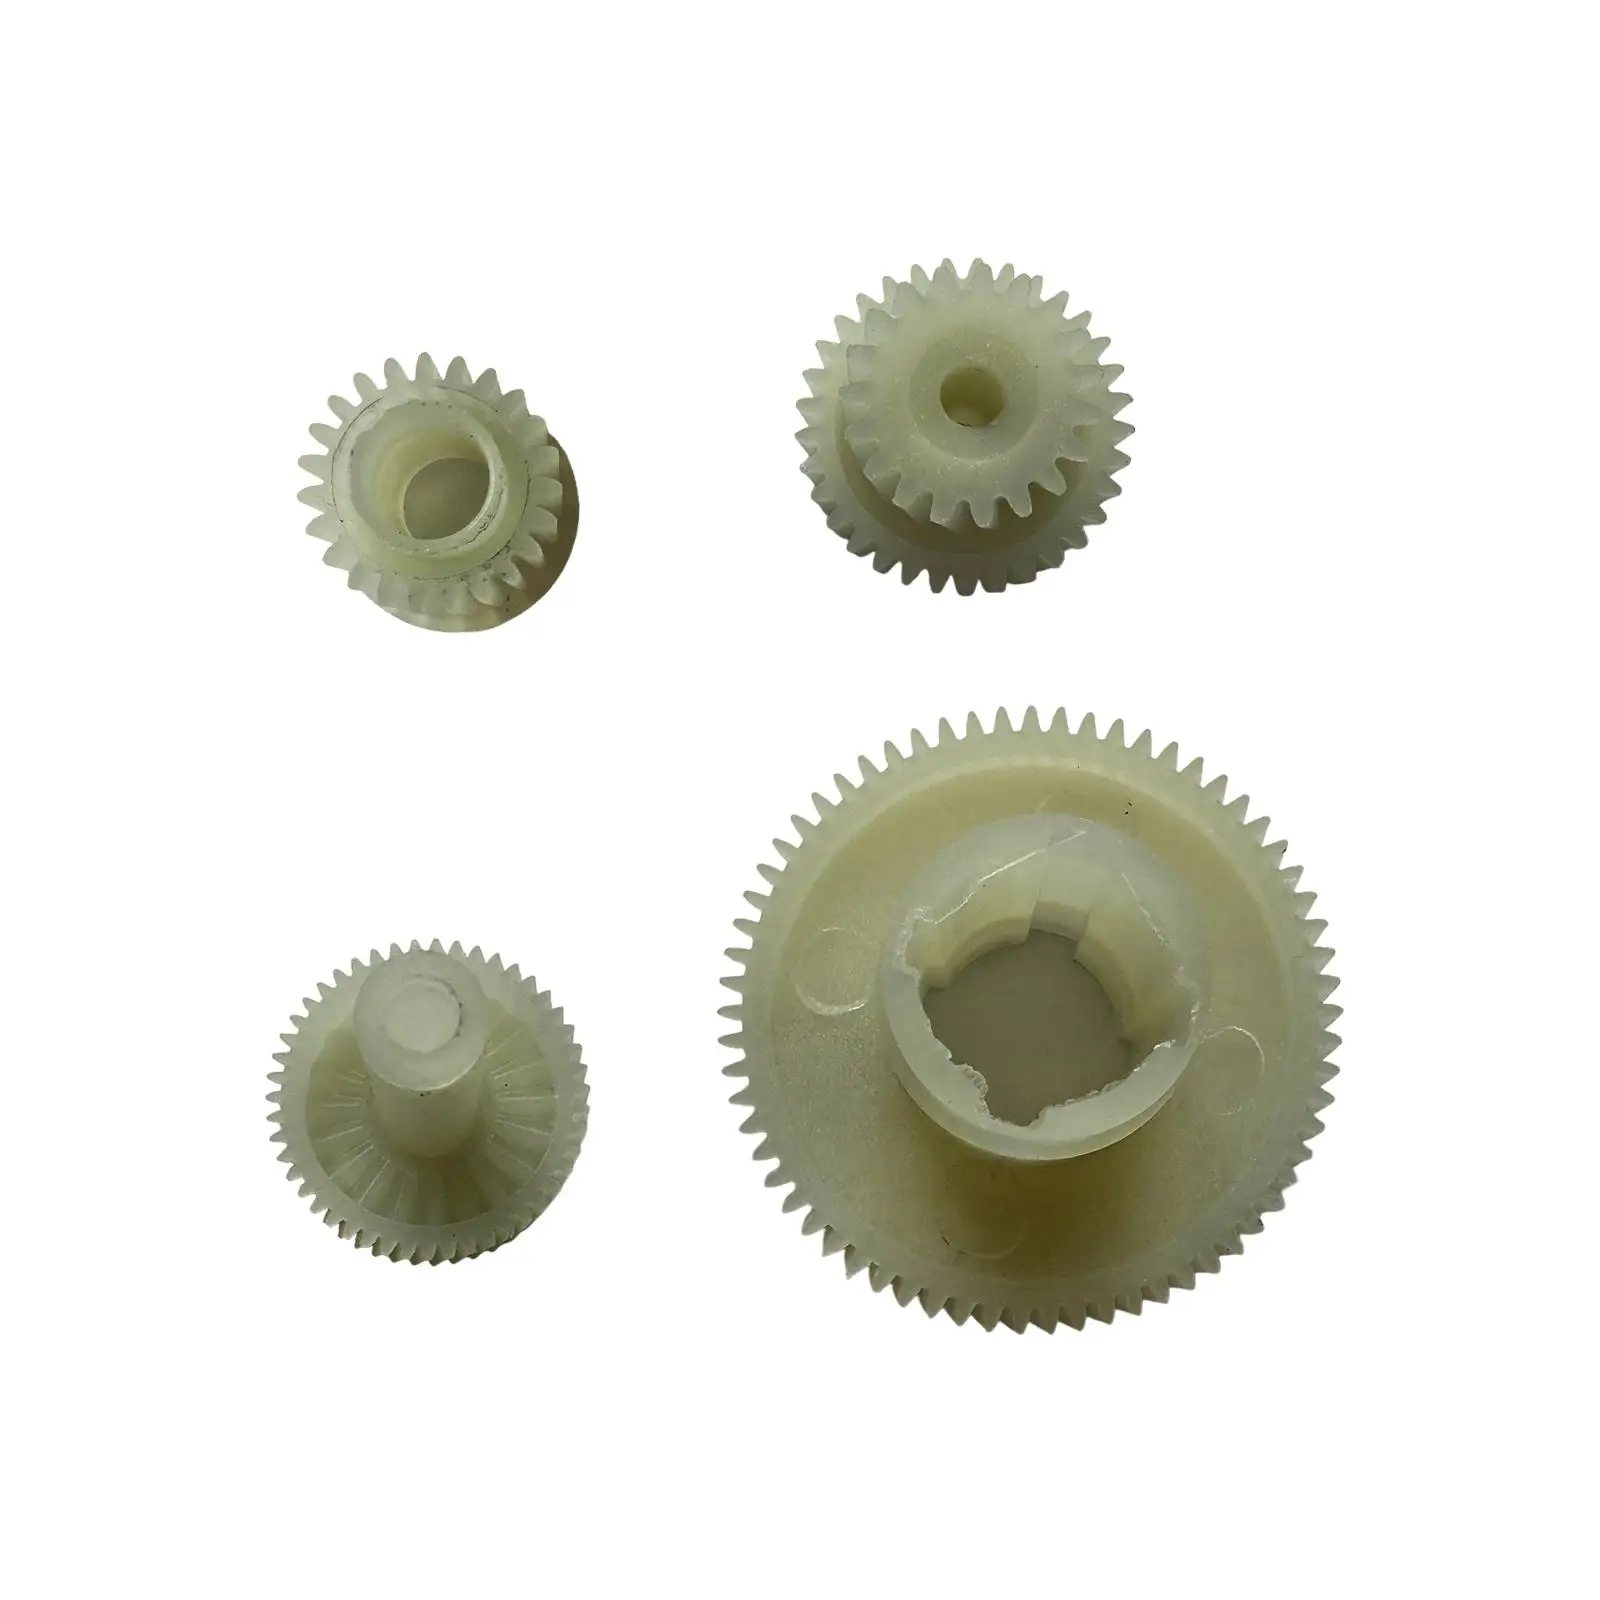 Parking Brake Actuator Repair Gears Easy Installation High Performance Accessory for Land Rover Discovery 3 4